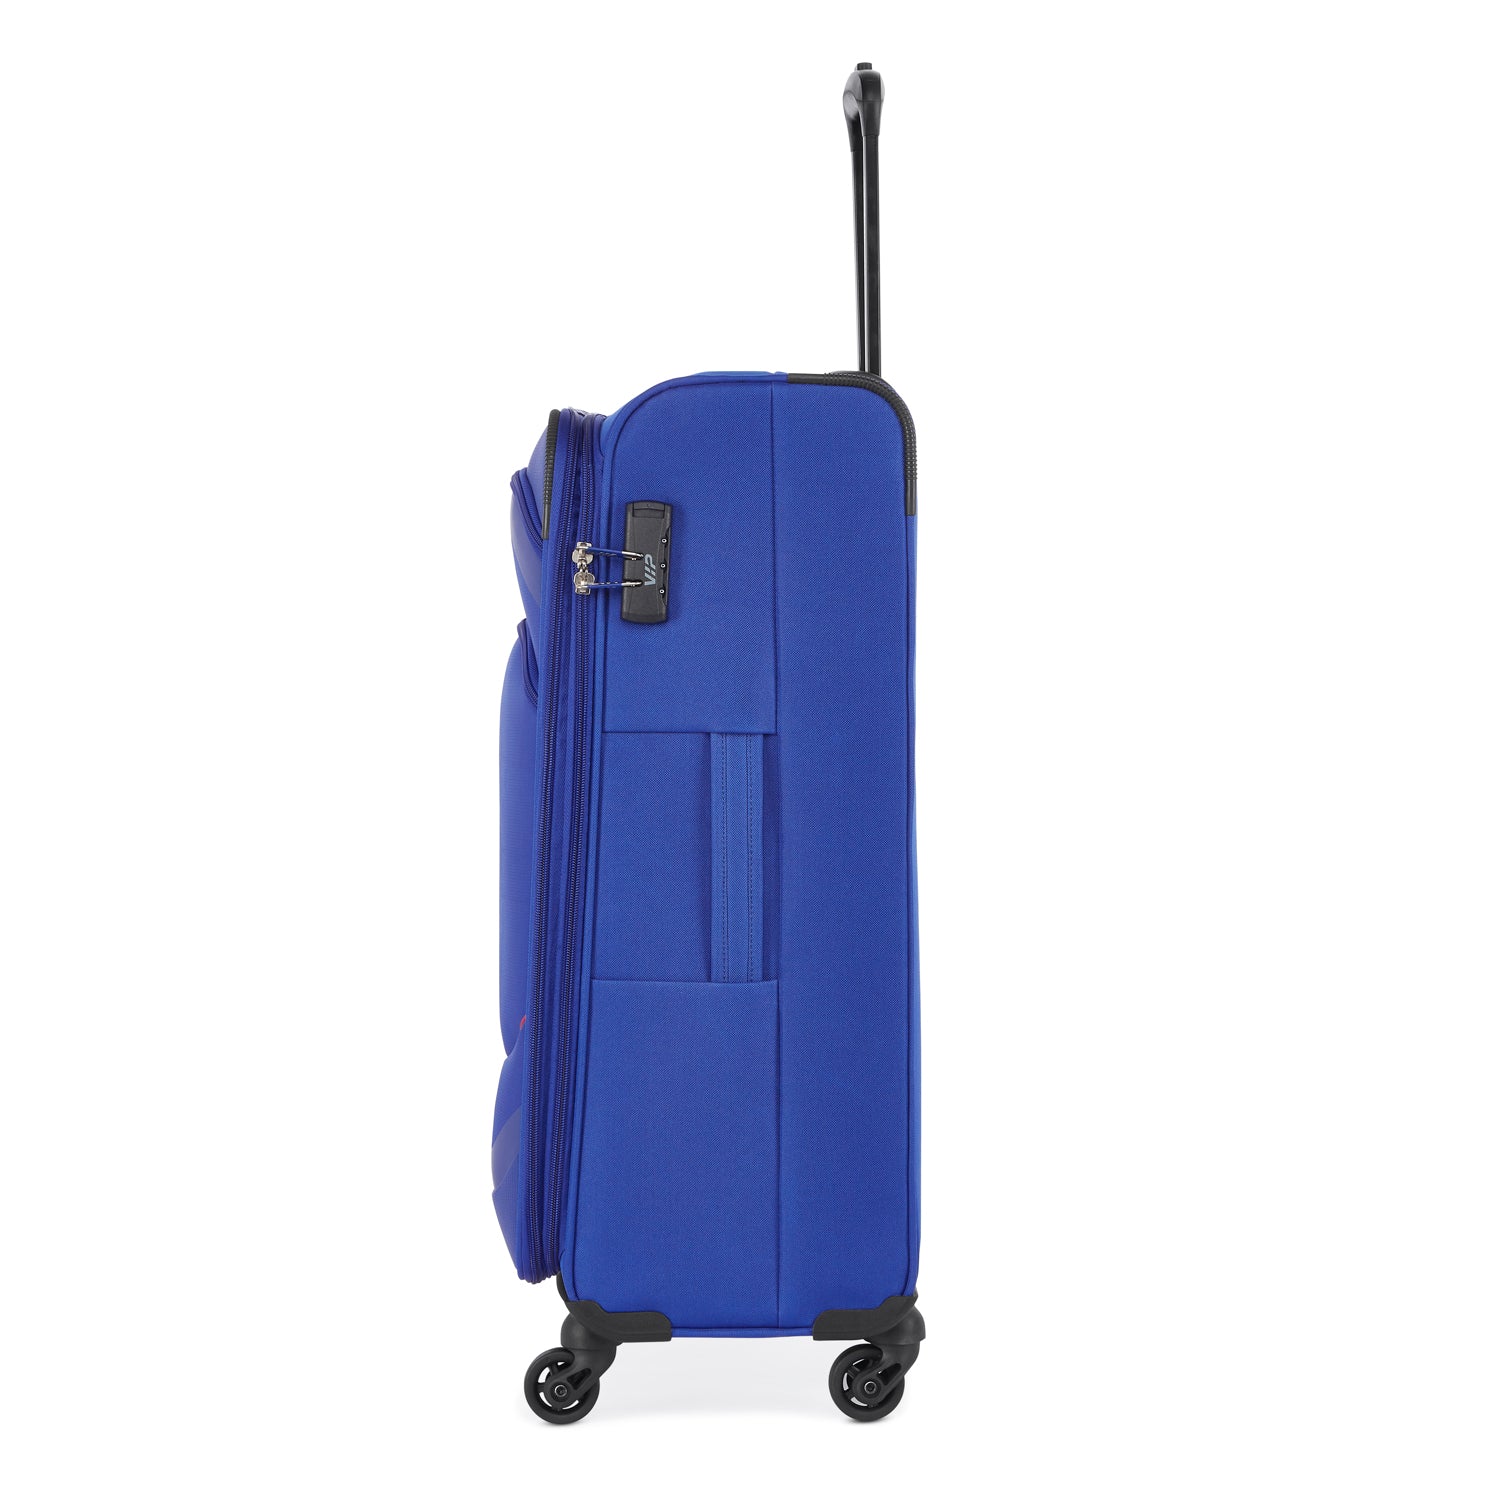 VIP Swiss Era Luggage Trolley Bag Premium Blue Polycarbonate Material 8  Wheels Trolley Bags, 100% Water Proof 360 Degree Rotation Luggage, Check-in  Size Luggage Bags, Cabin Size Bag (Size - 